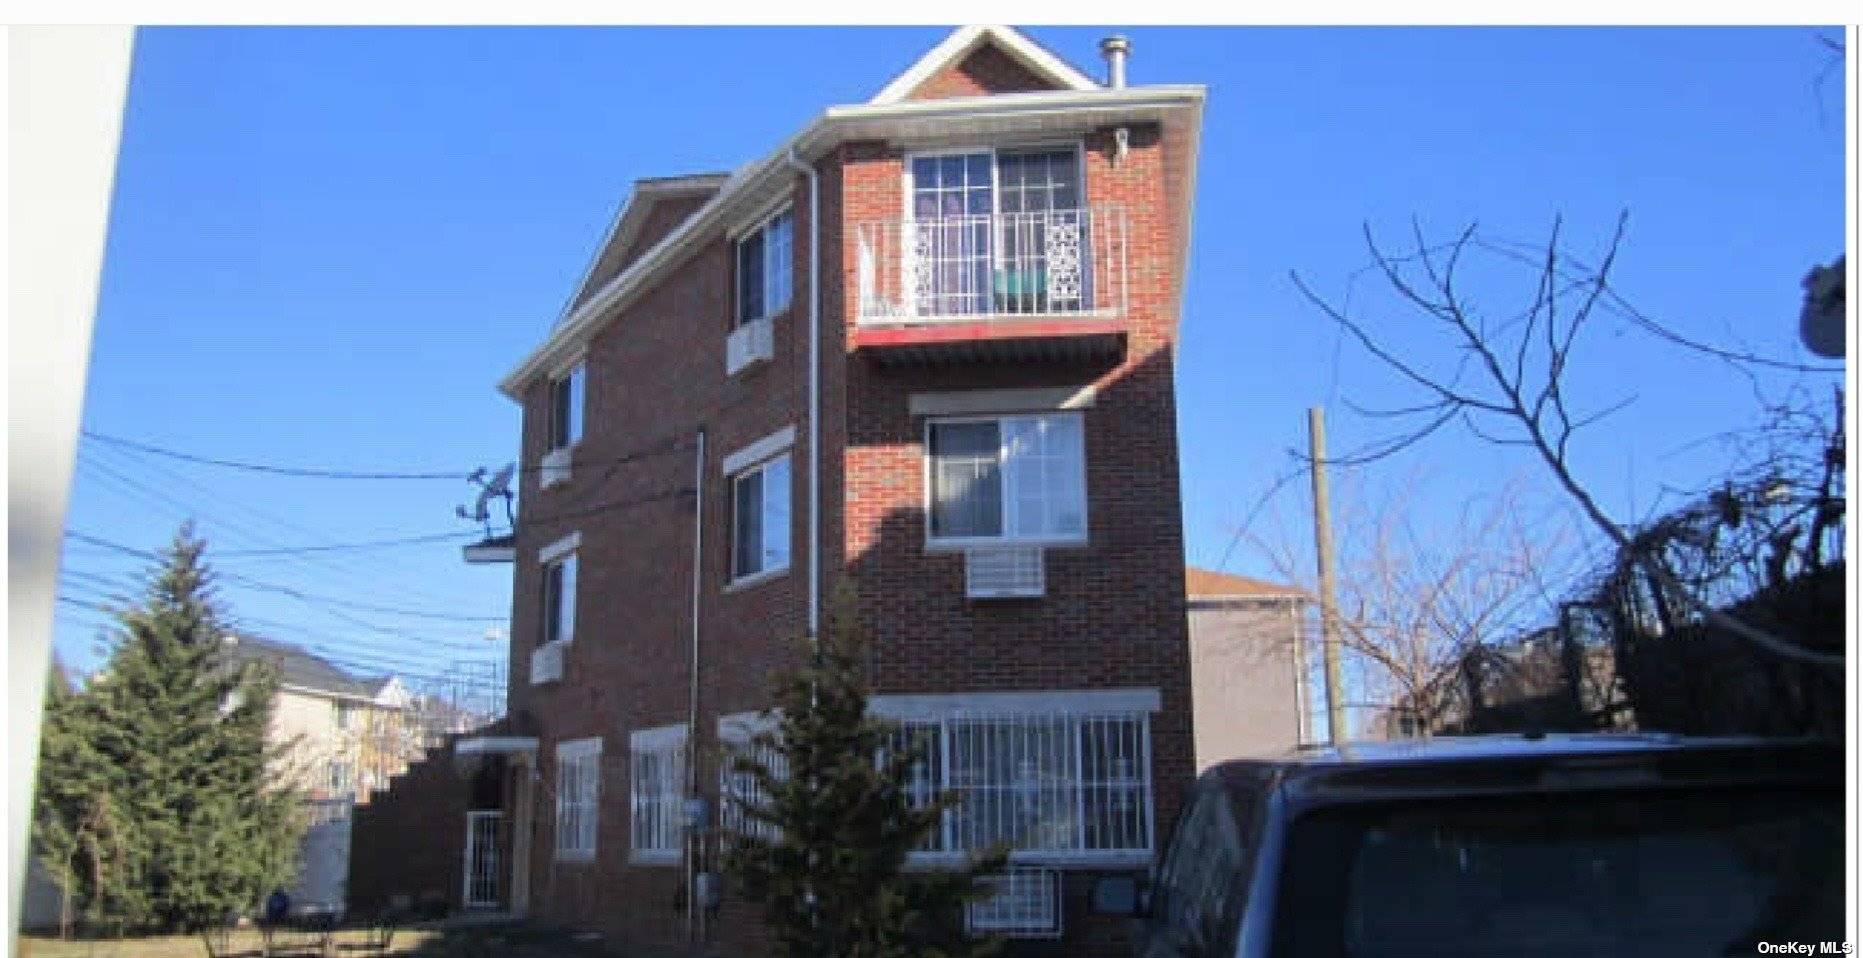 For Sale Charming 2 Family Home in Prime Upper Ditmars, Queens Year Built 2006 Layout Three floors basement, first floor, and second floor serving as a triplex ; third floor ...